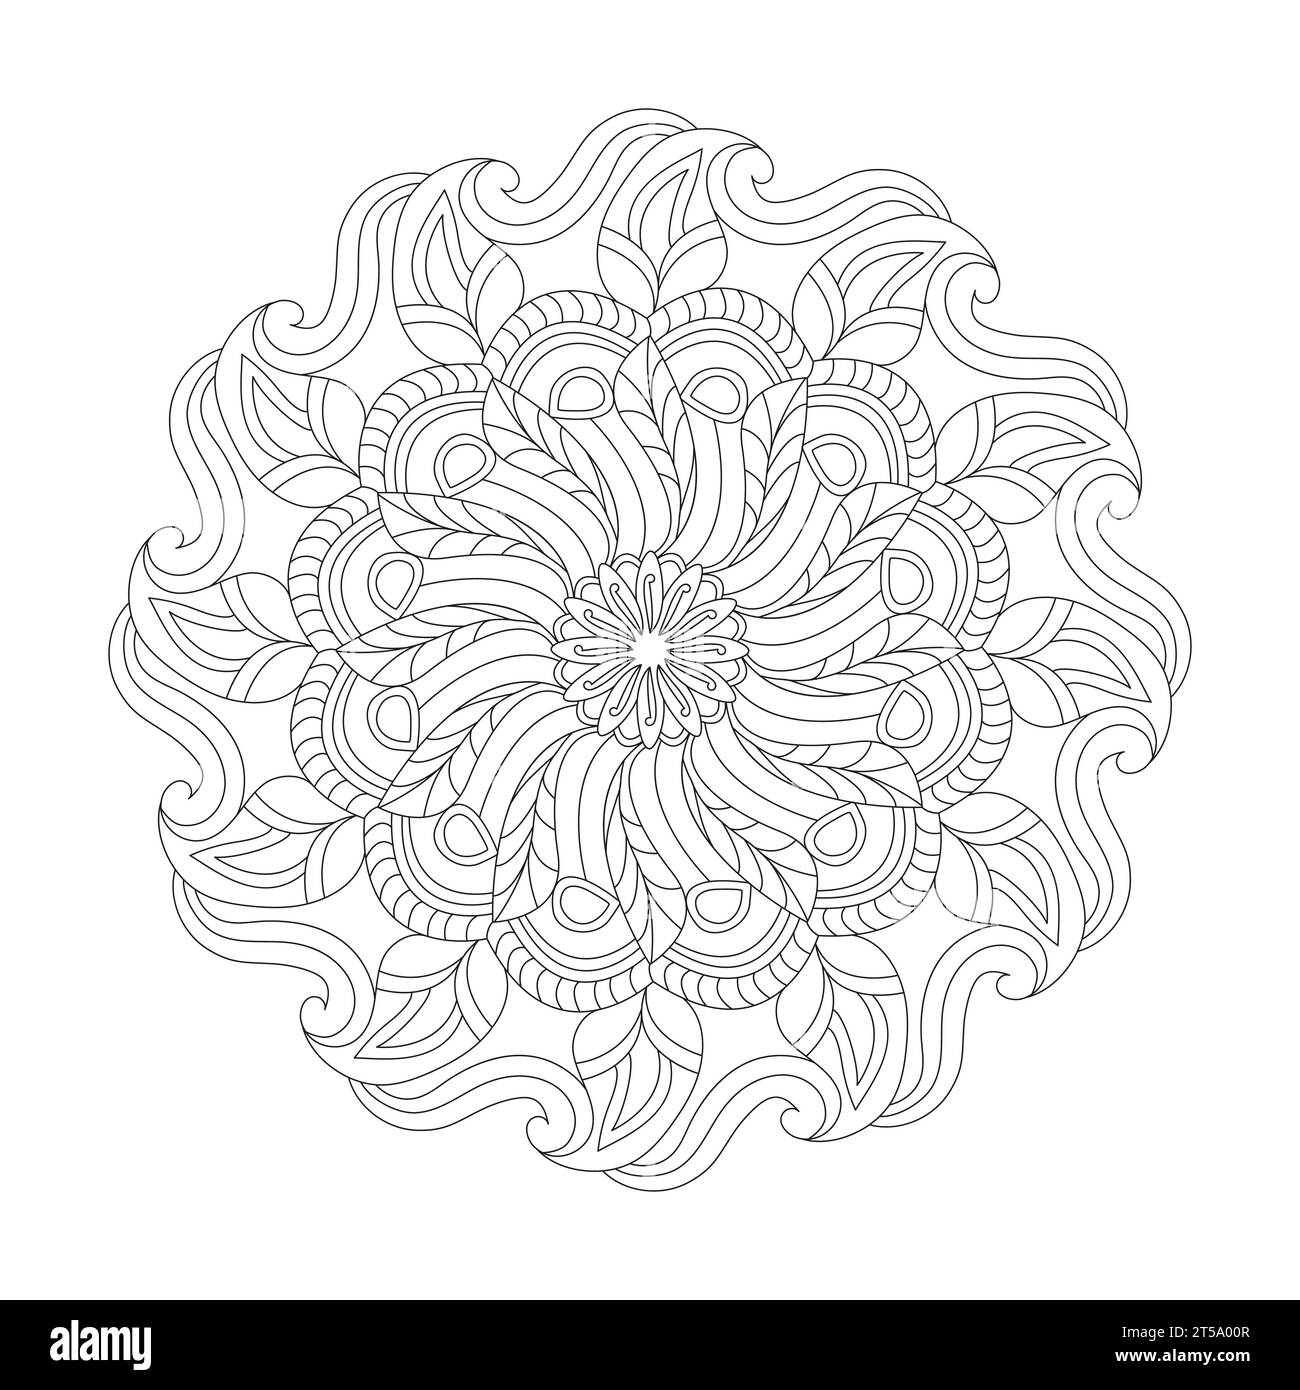 Celestial tranquillity adult mandala colouring book page for KDP book interior Peaceful Petals, Ability to Relax, Brain Experiences, Harmonious Haven, P Stock Vector